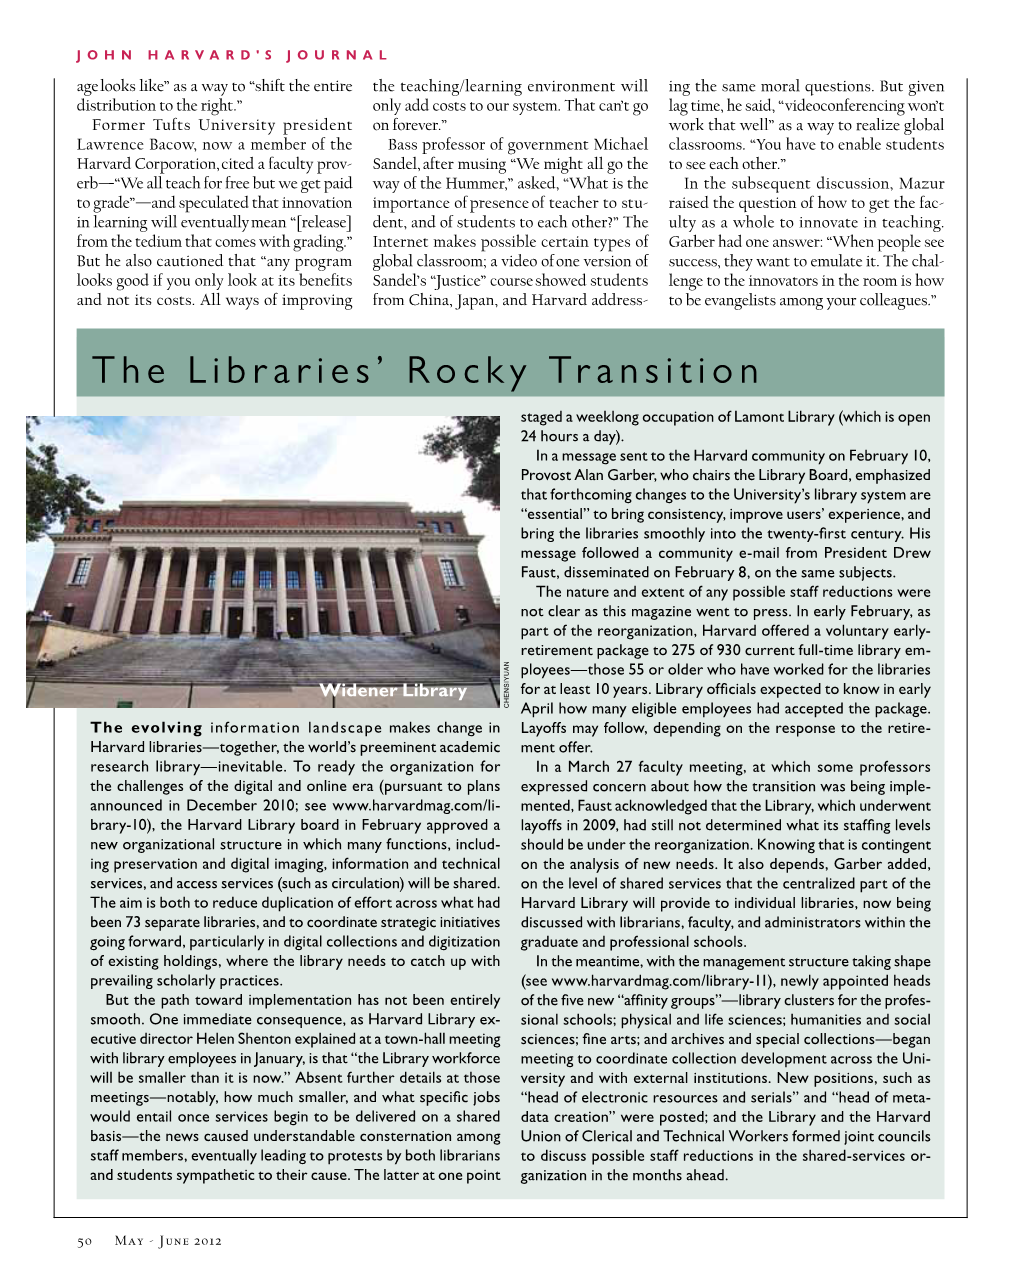 The Libraries' Rocky Transition